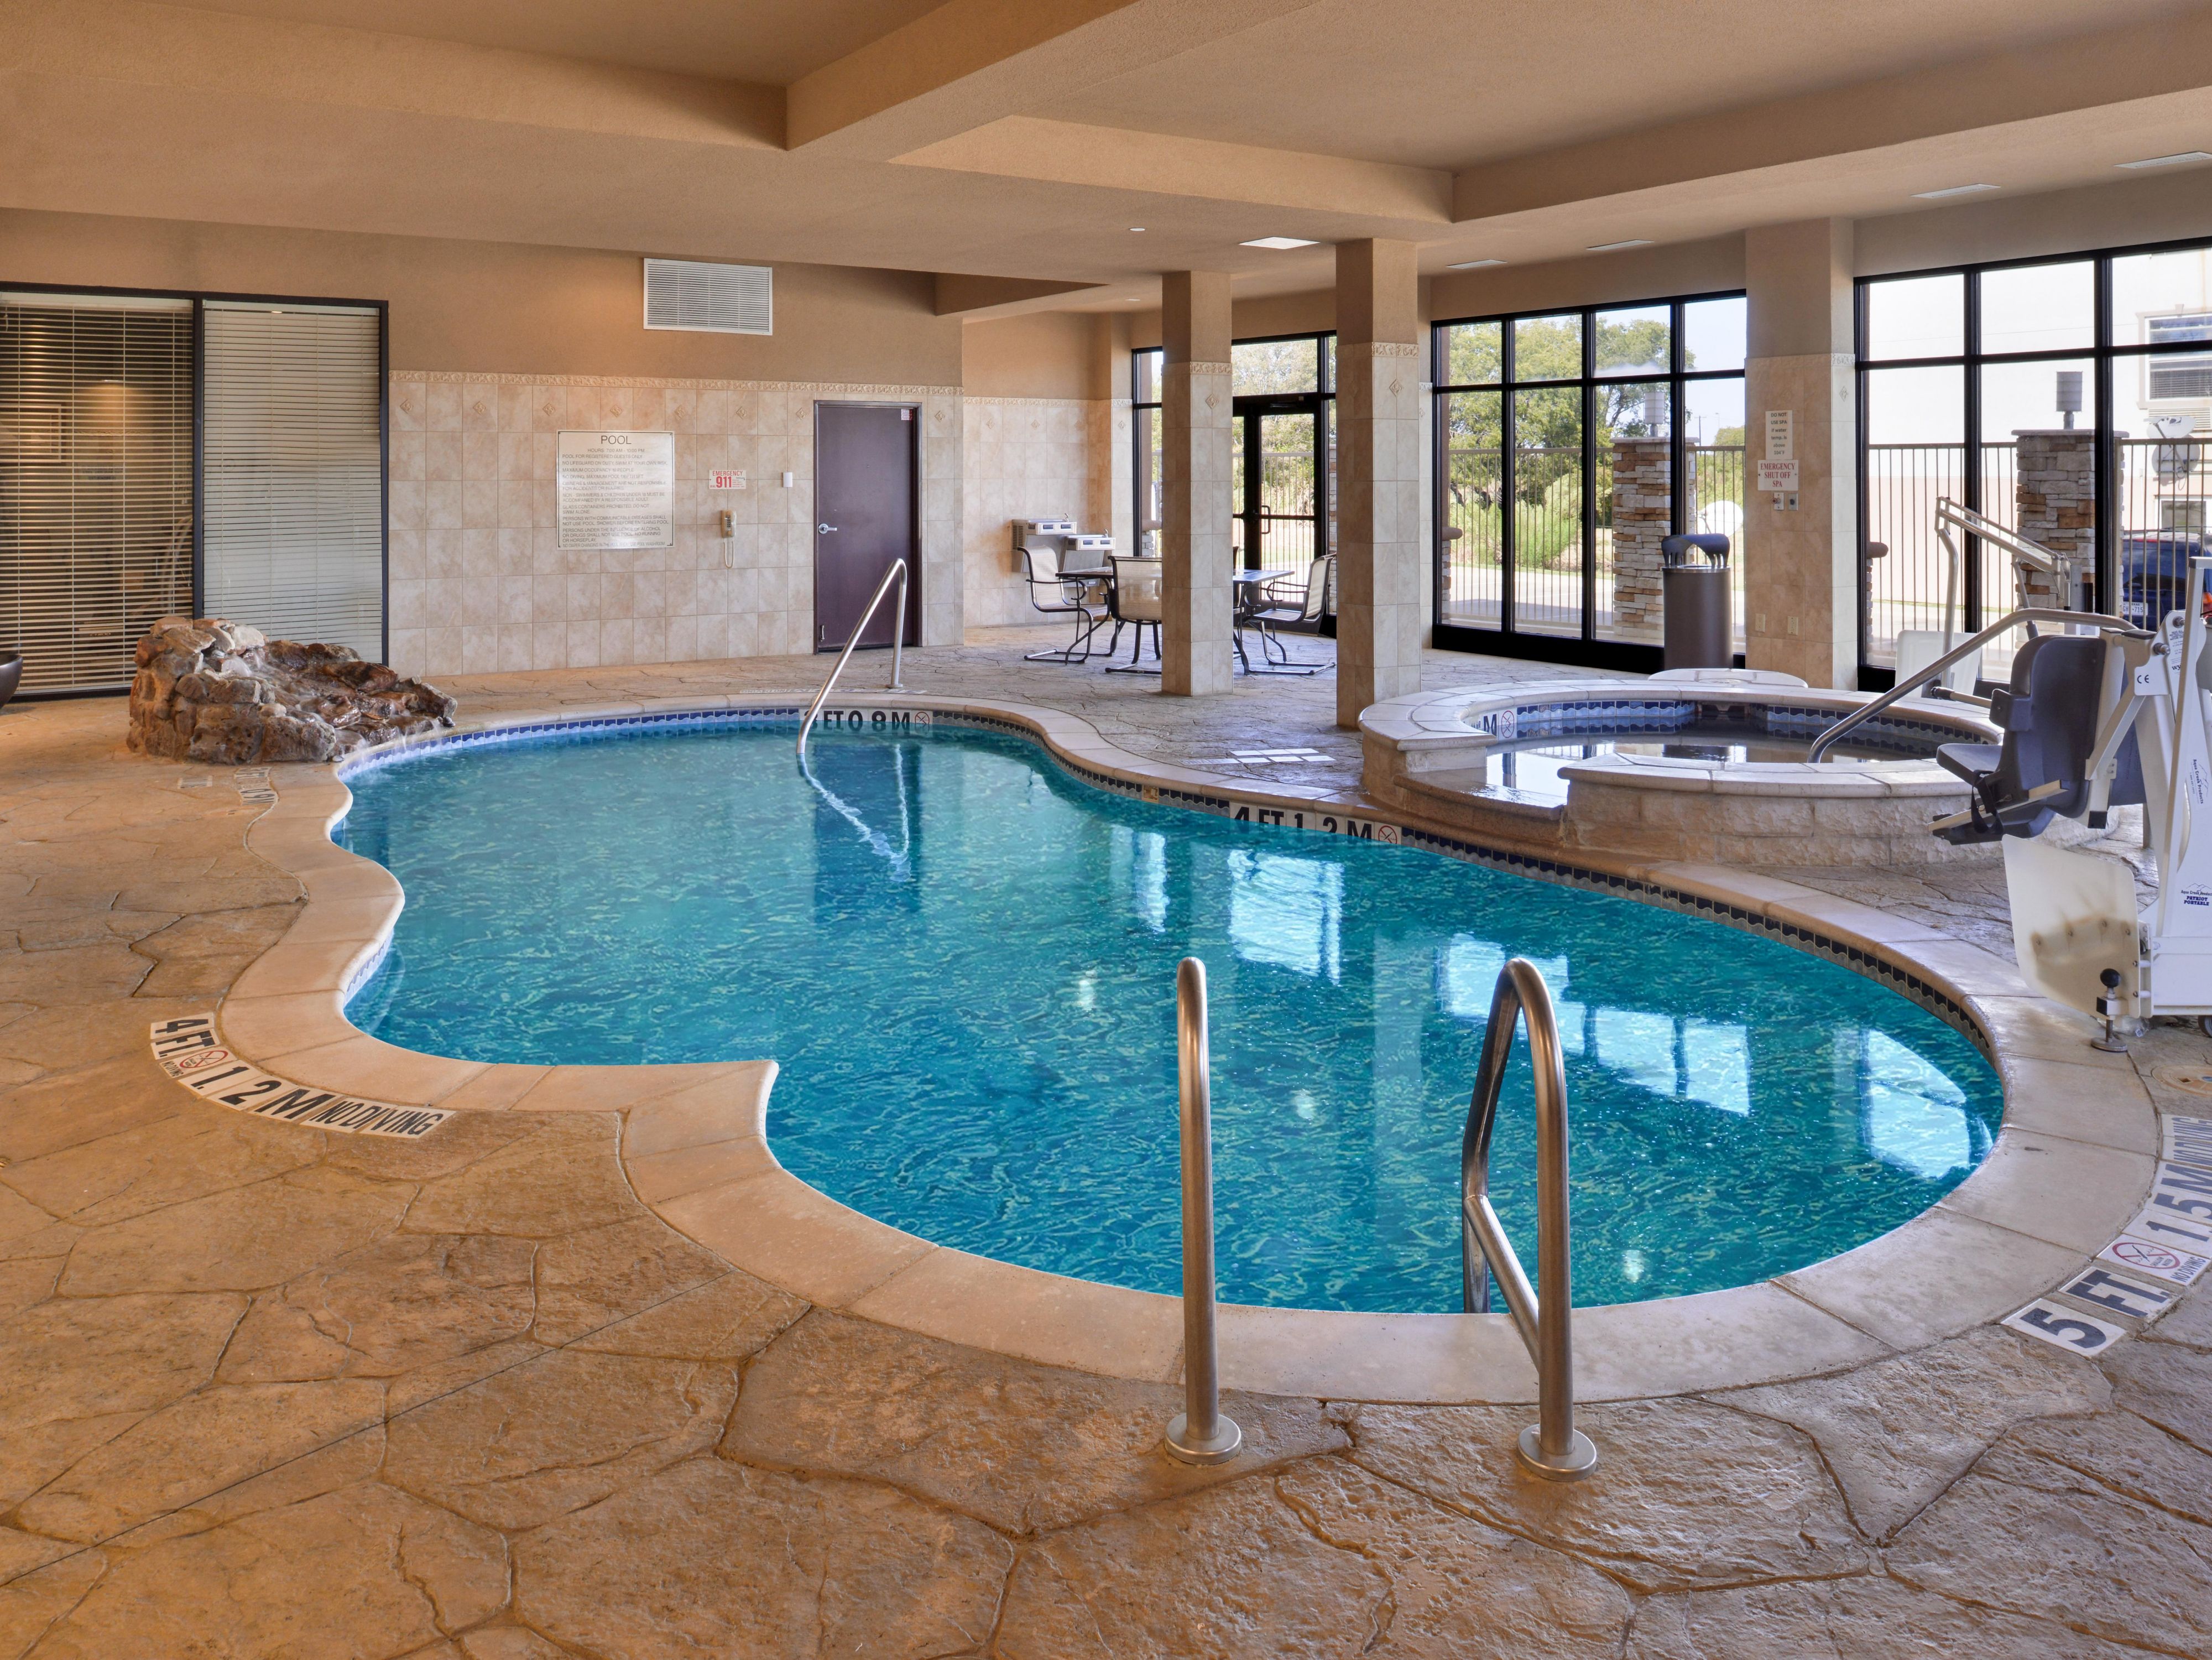 After a long day, cool off with a dip in our indoor pool or relax in our Spa and Hot tub. 